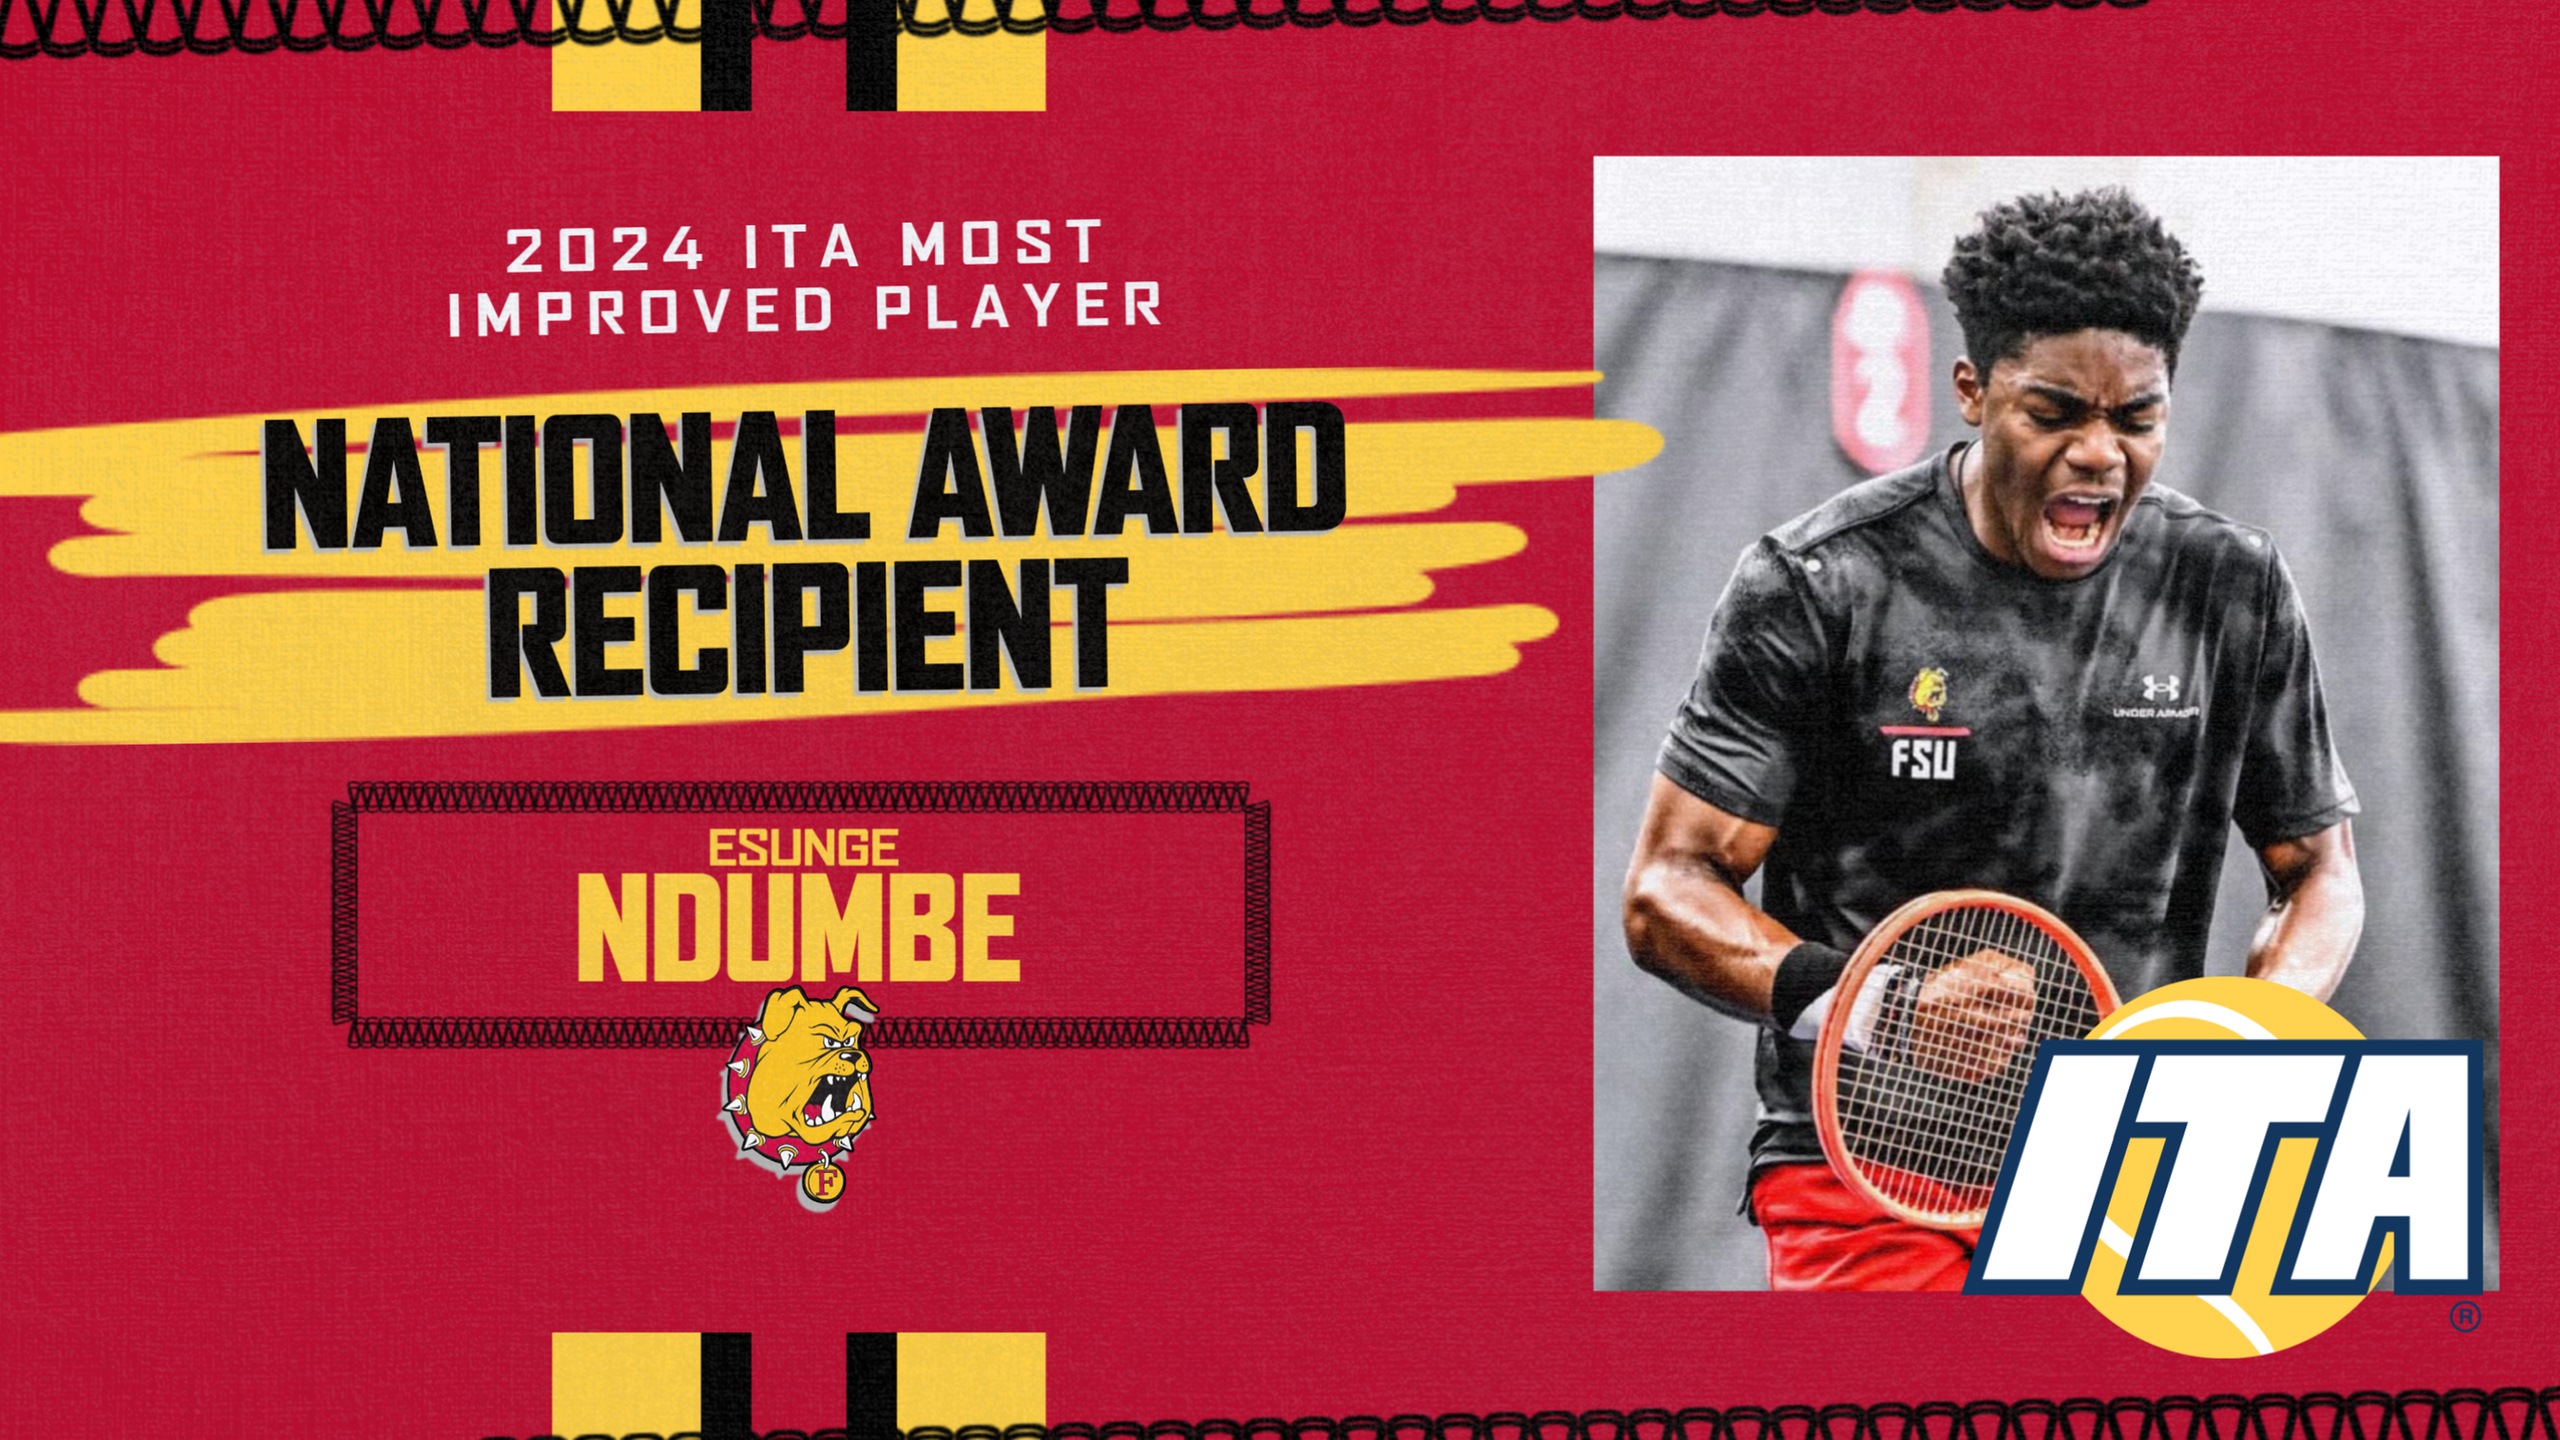 Ferris State's Esunge Ndumbe Chosen As National Recipient Of ITA Most Improved Player Award